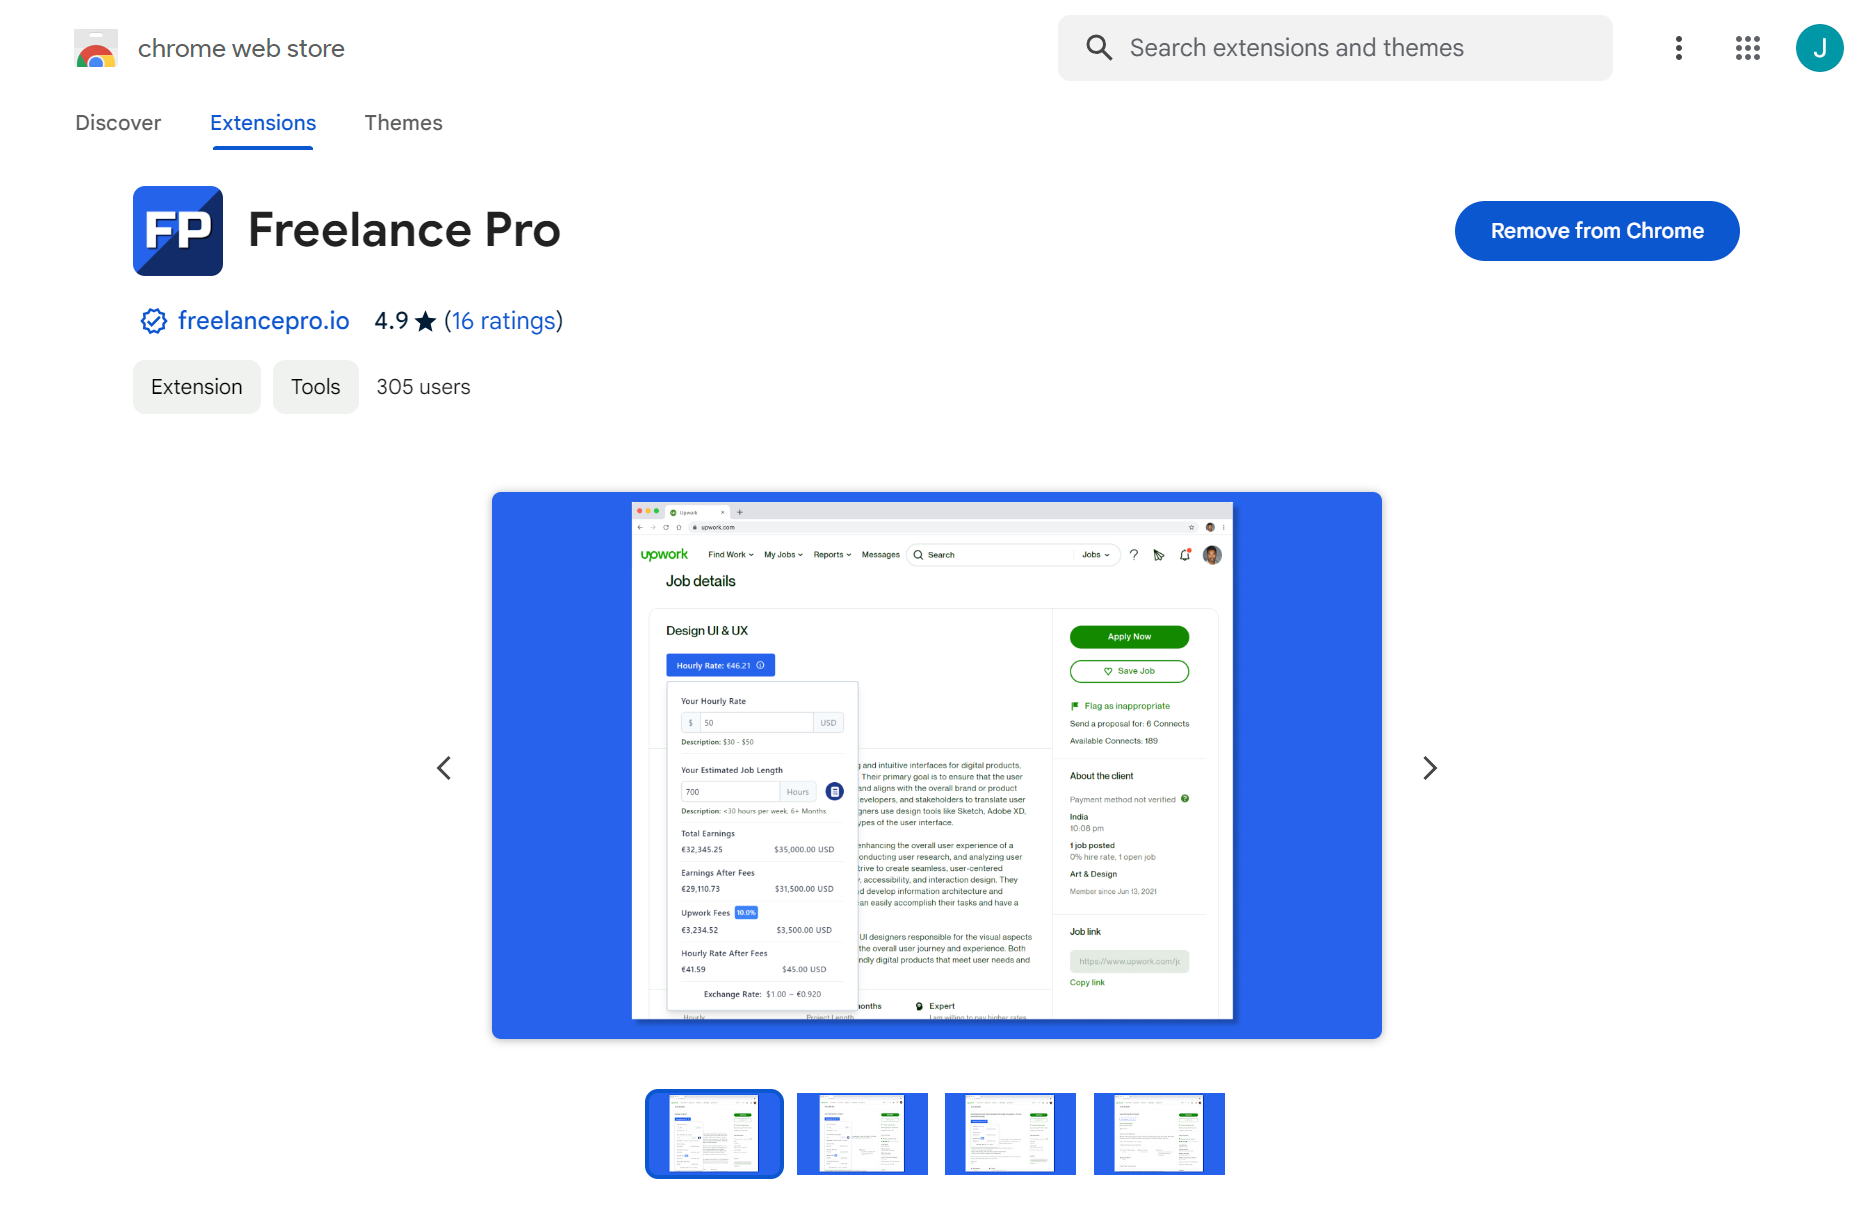 The image is a screenshot of the Chrome Web Store listing for a Chrome extension named "Freelance Pro." The listing features the Freelance Pro logo and indicates that the extension has a rating of 4.9 stars from 16 ratings.